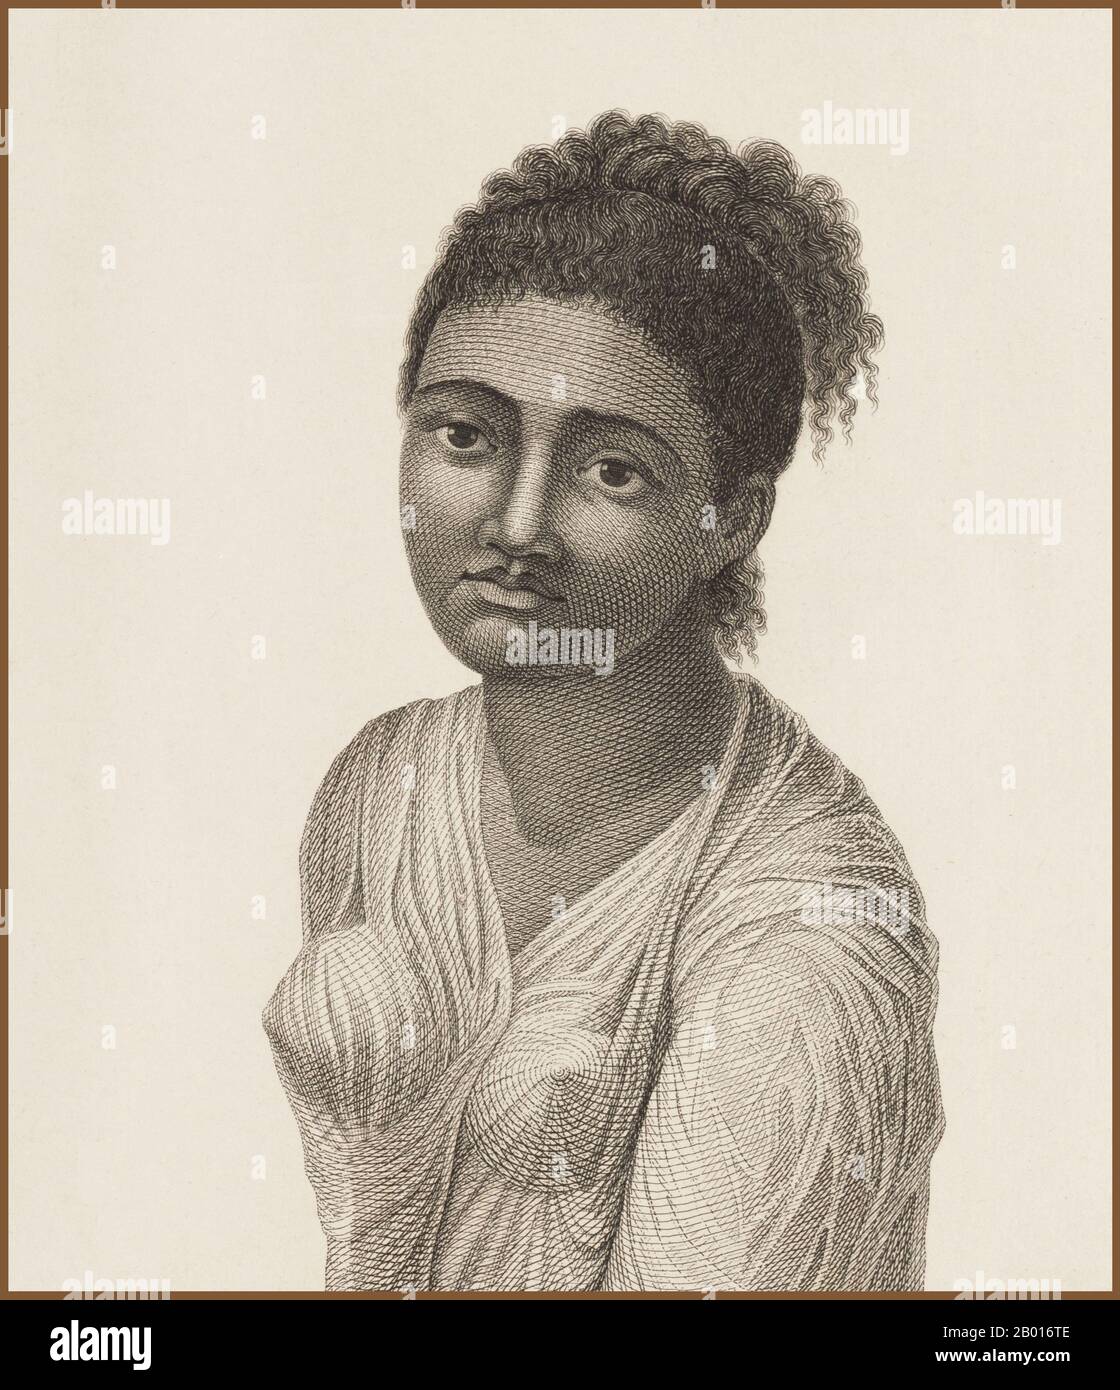 Indonesia: A young woman of Ambon in Maluku. Portrait from 'Atlas du Voyage de La Pérouse' by Jean Piron (1767-1797) & Jacques-Louis Copia (1764-1799), 1792.  Jean-François de Galaup, Comte de La Pérouse (1741-1788) was a French explorer and naval officer. In 1785, the King of France commissioned La Perouse to head an expedition to explore the Pacific Ocean, to investigate whaling and fur prospects, and to establish French claims in this area. La Pérouse had admired the explorer James Cook, and wanted to continue his work. Stock Photo